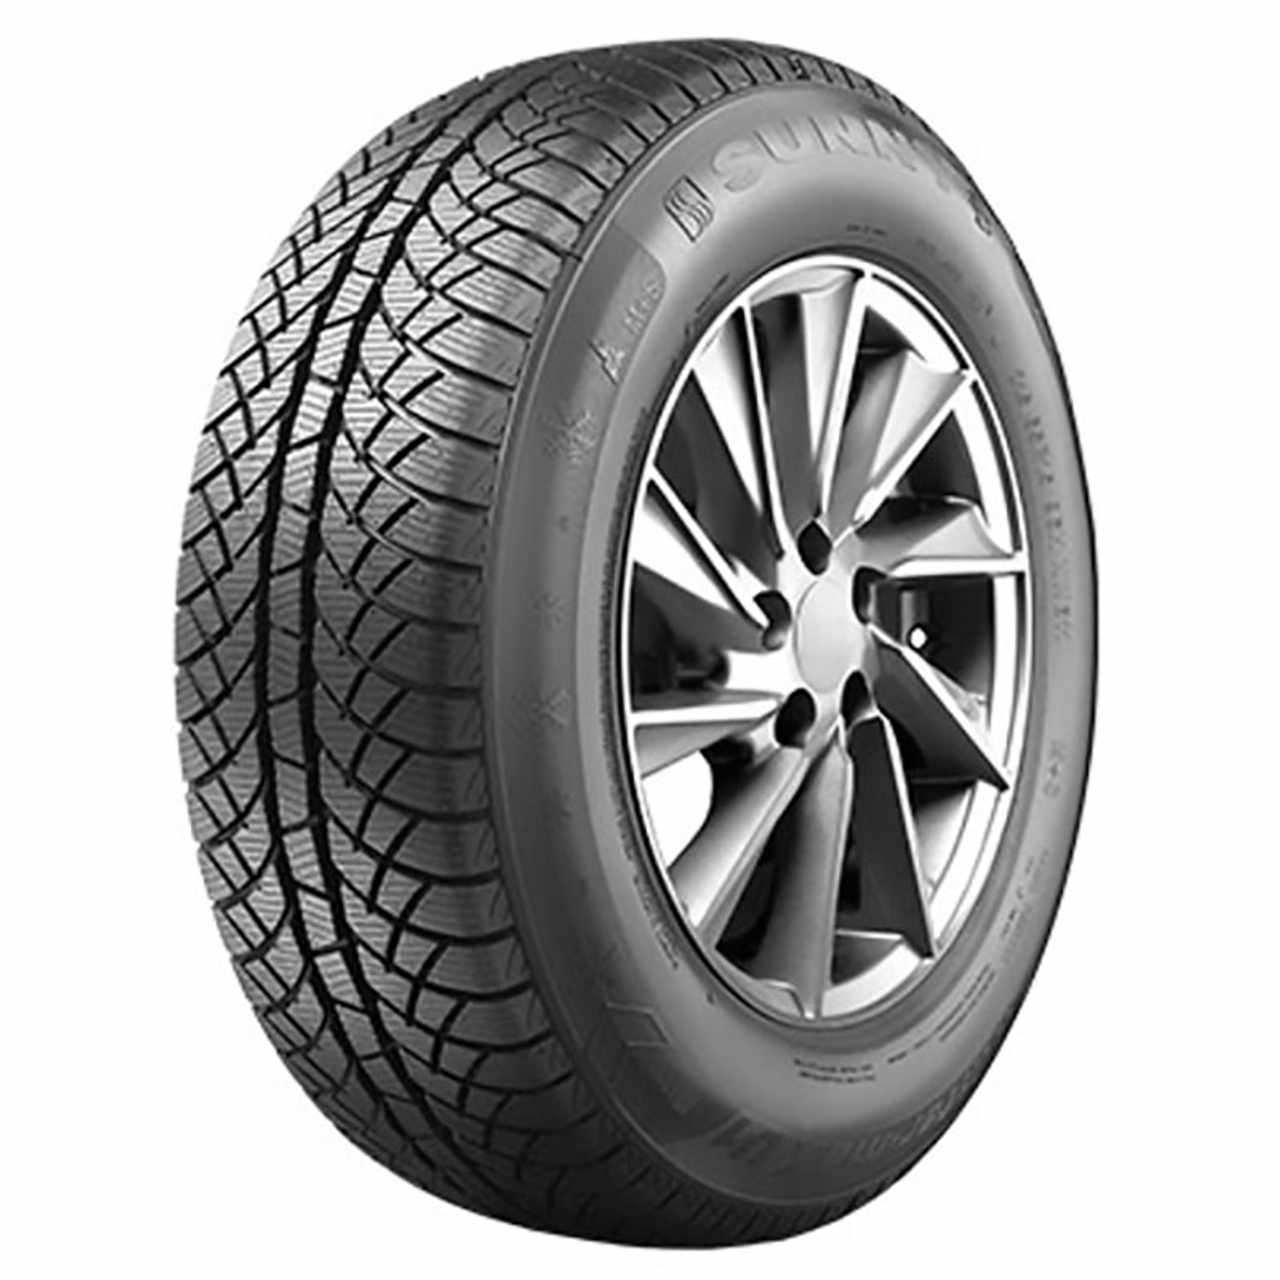 SUNNY WINTERMAX NW611 195/65R15 91H BSW